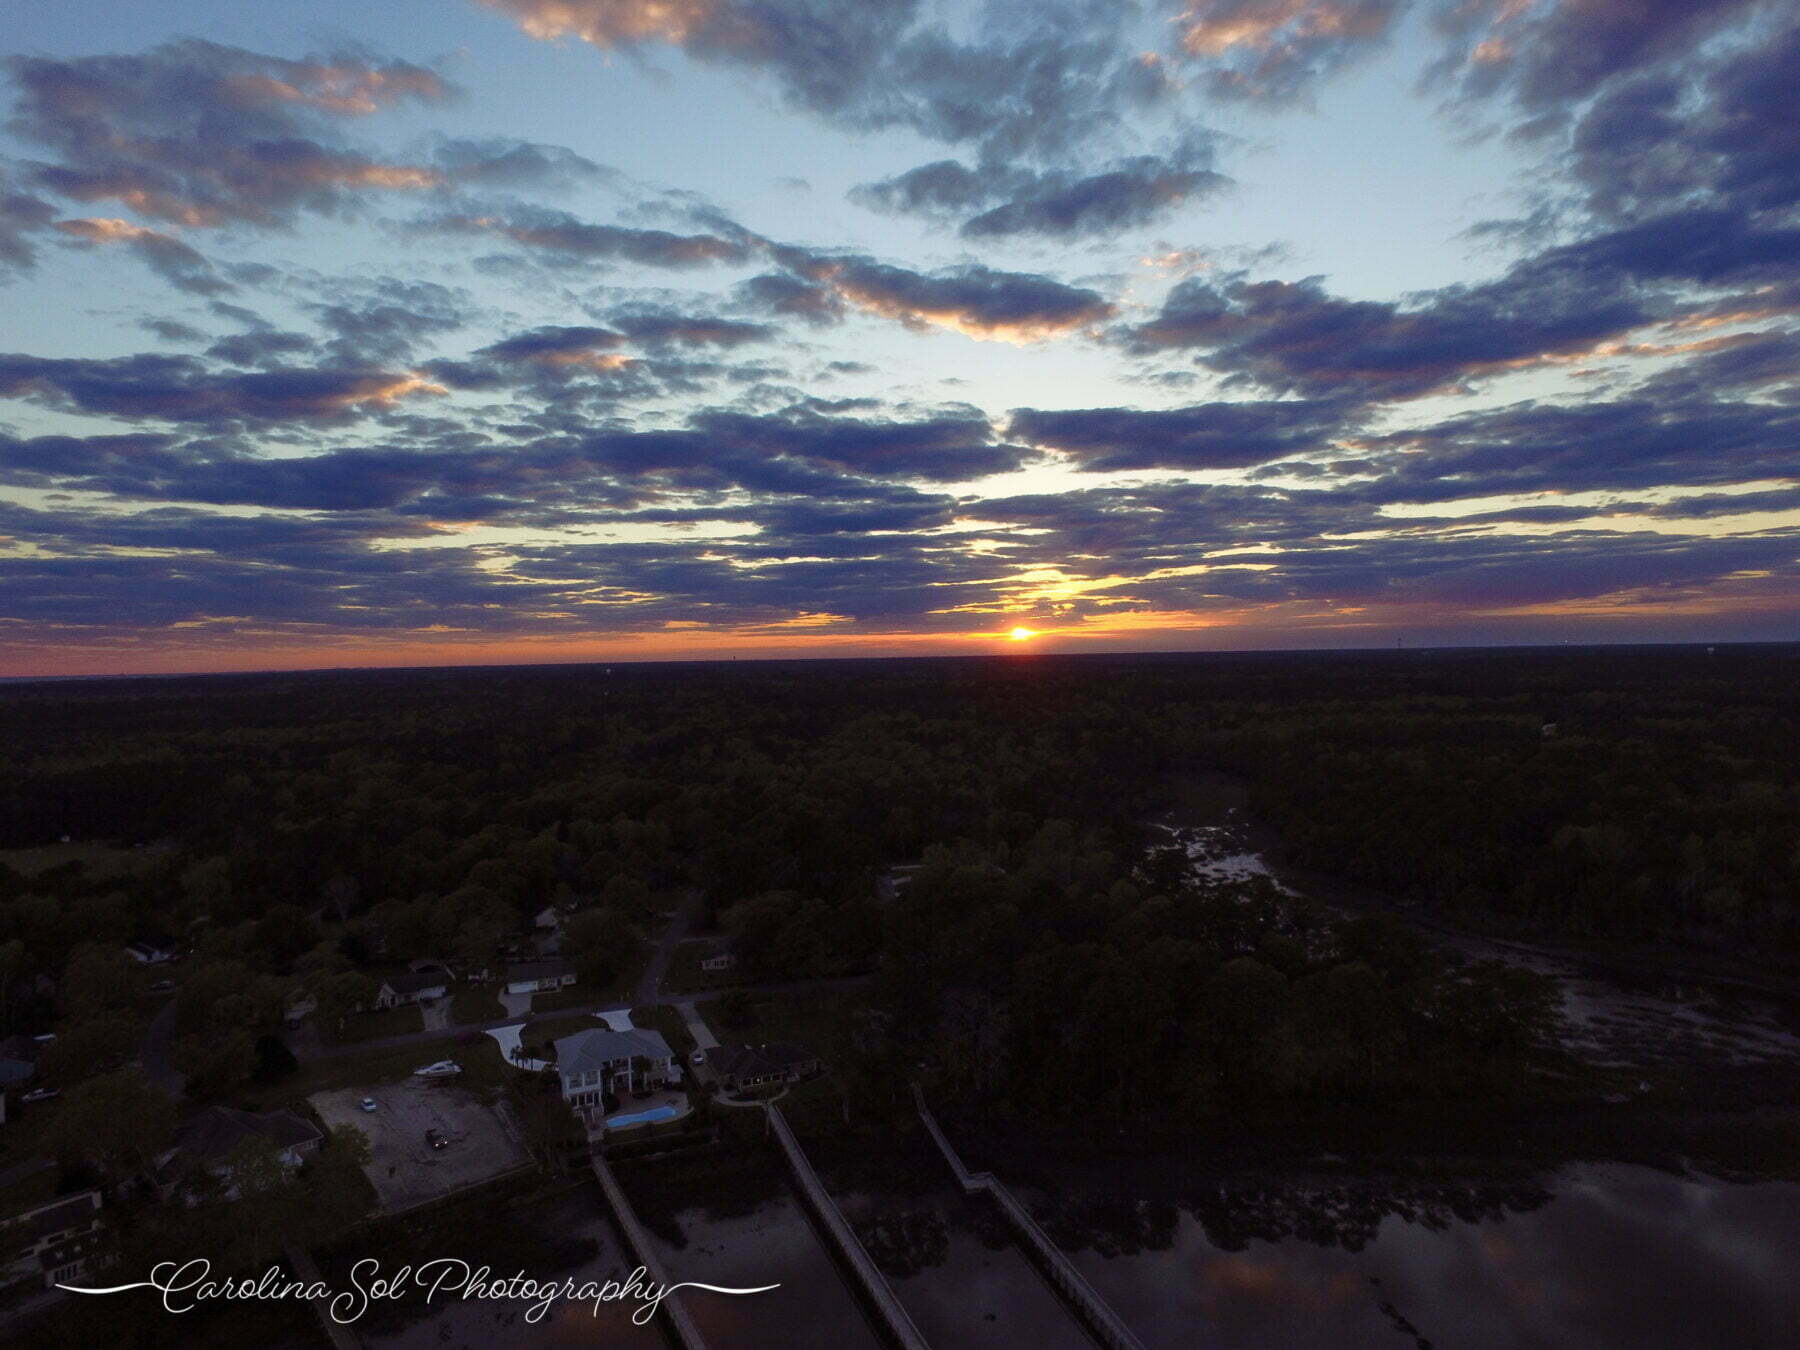 Shallotte River drone photography.